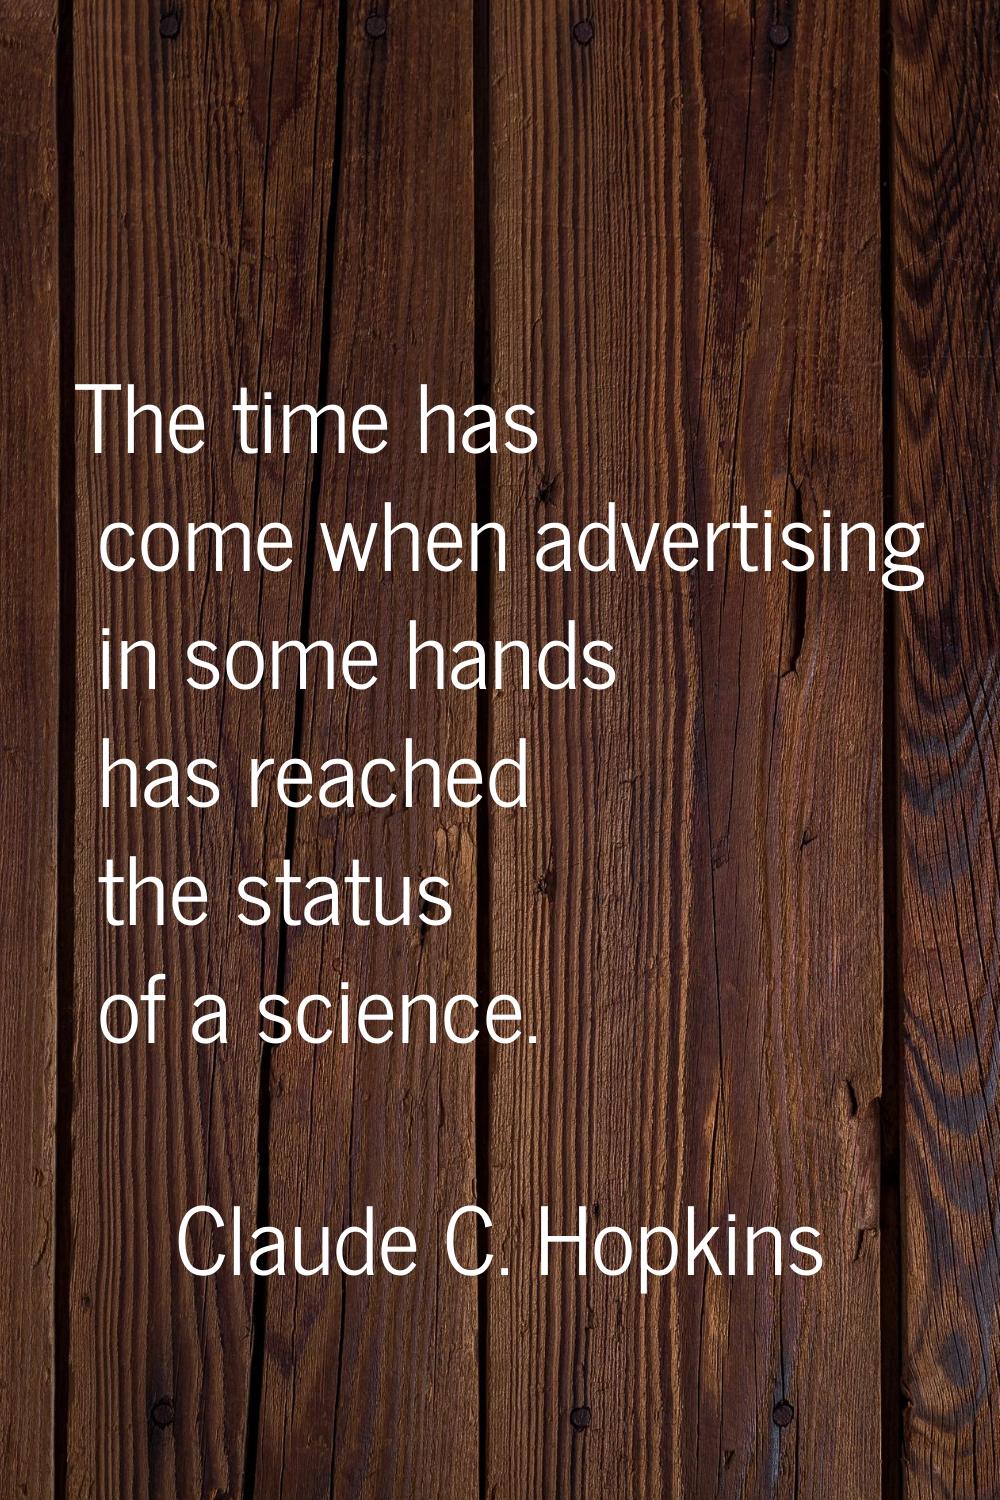 The time has come when advertising in some hands has reached the status of a science.